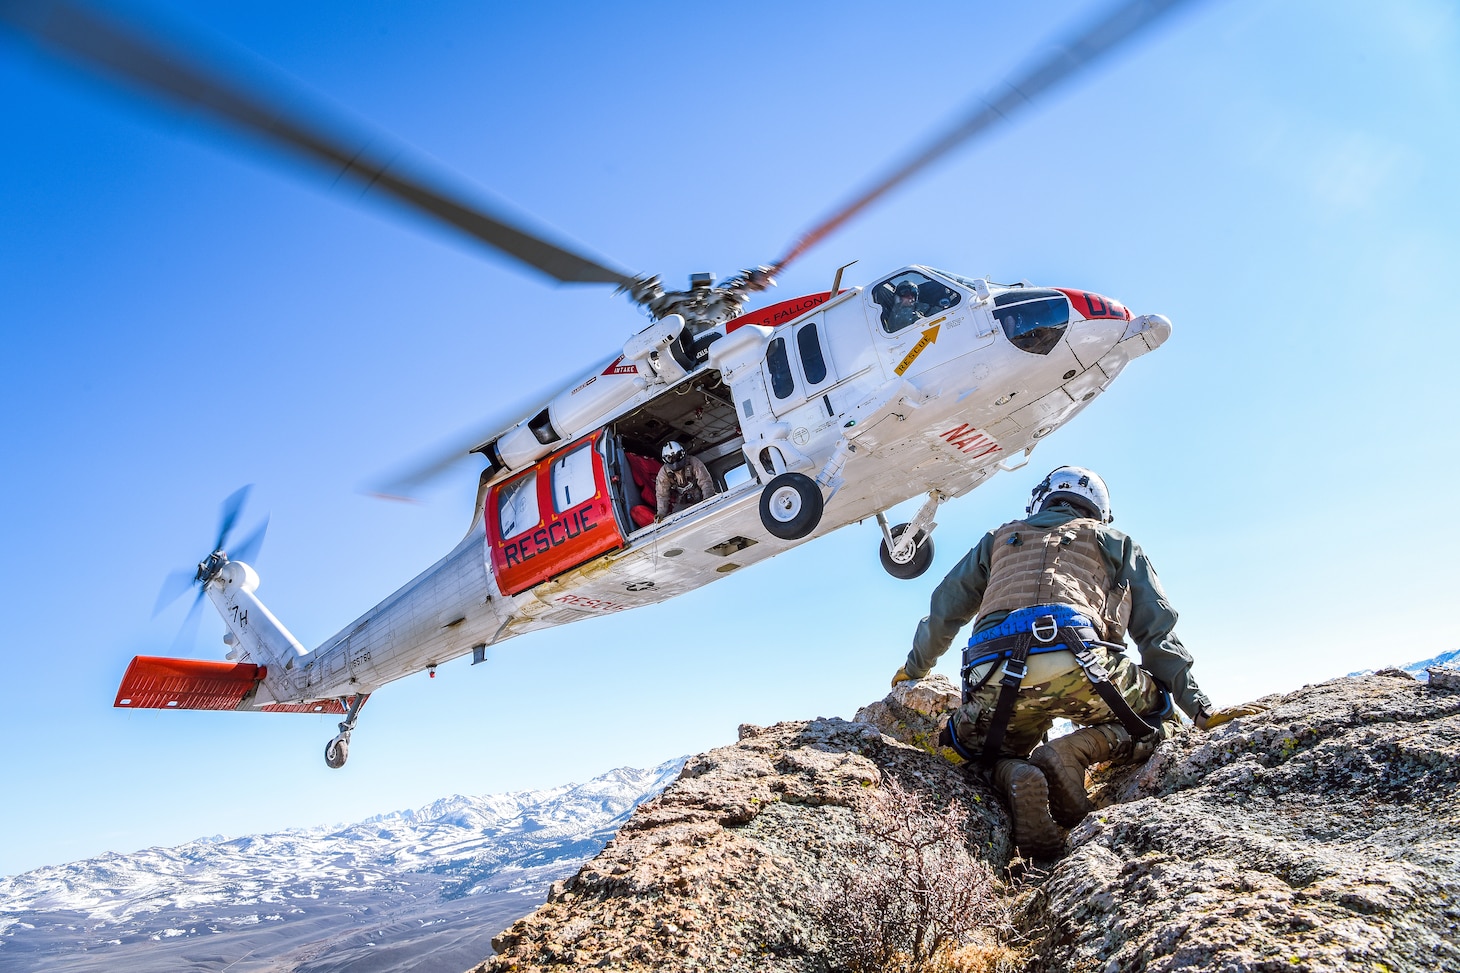 An MH-60S Knighthawk helicopter assigned to the "Longhorns" of Helicopter Search and Rescue (SAR) Squadron, practices pinnacle landings and extractions during a mountain flying SAR training event.